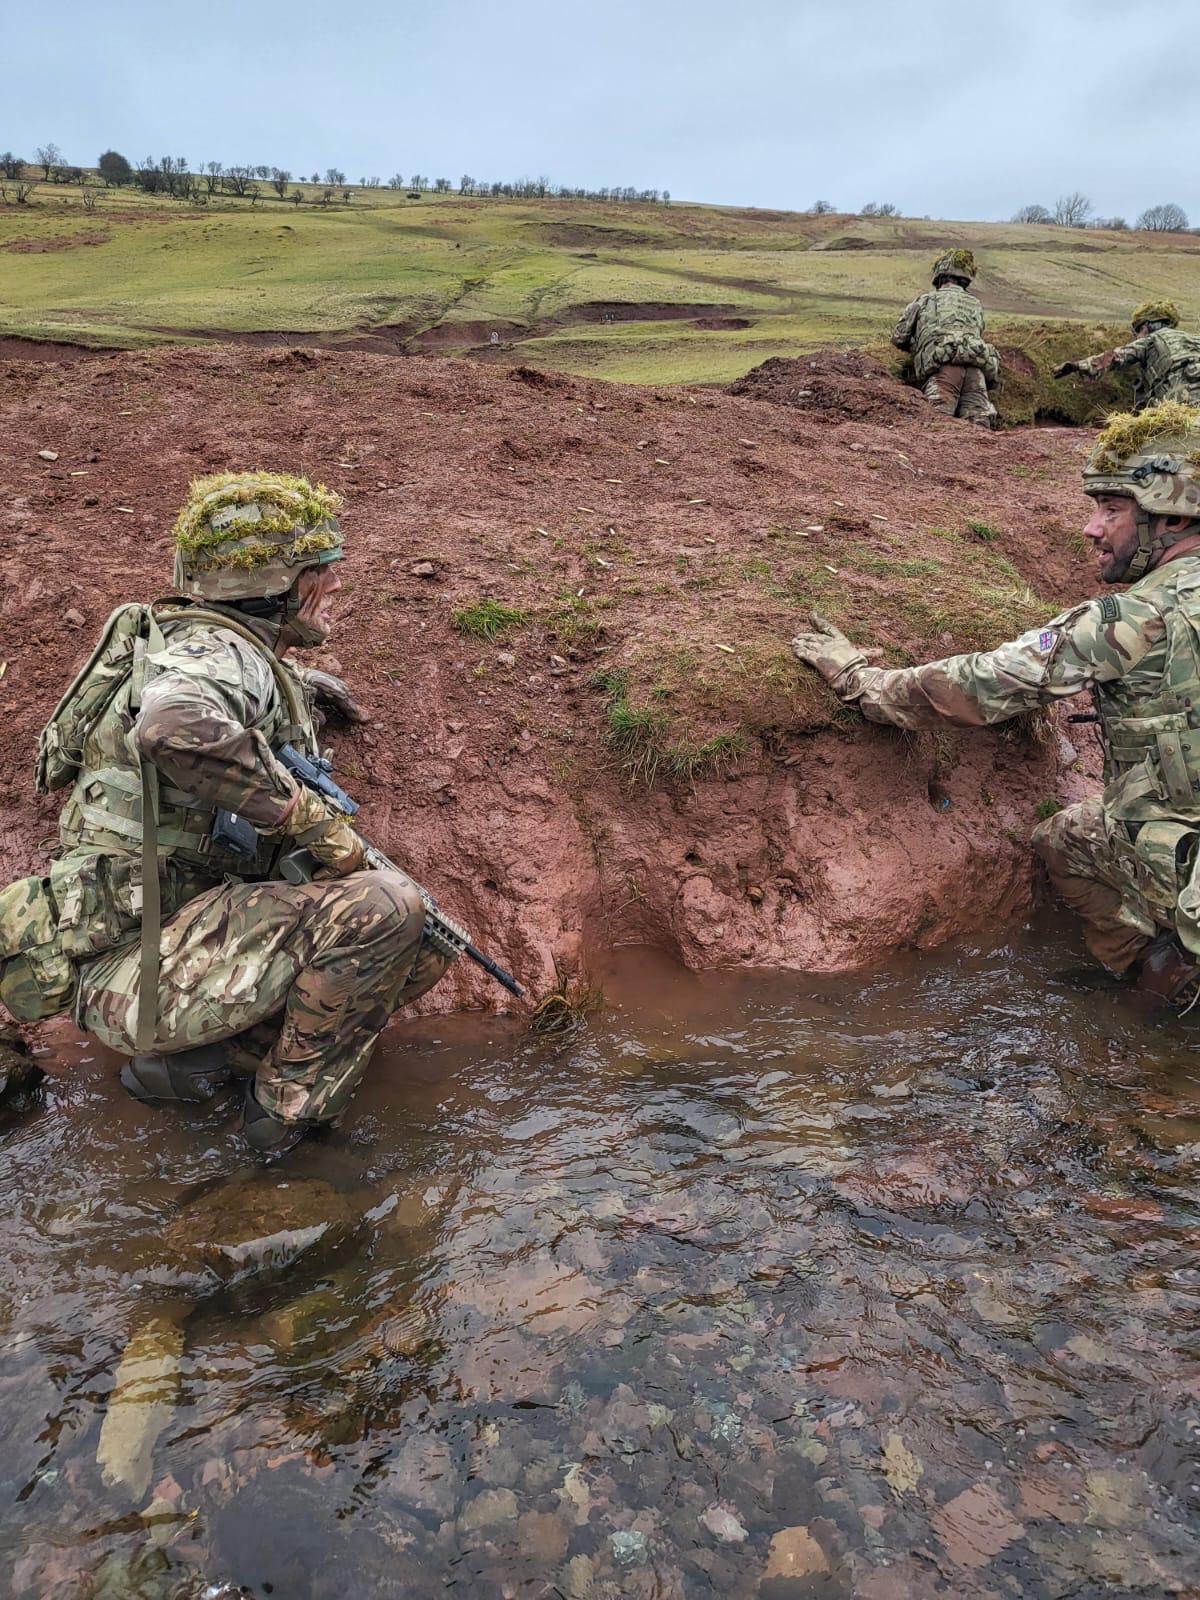 Personnel crouch in river by muddy bank.